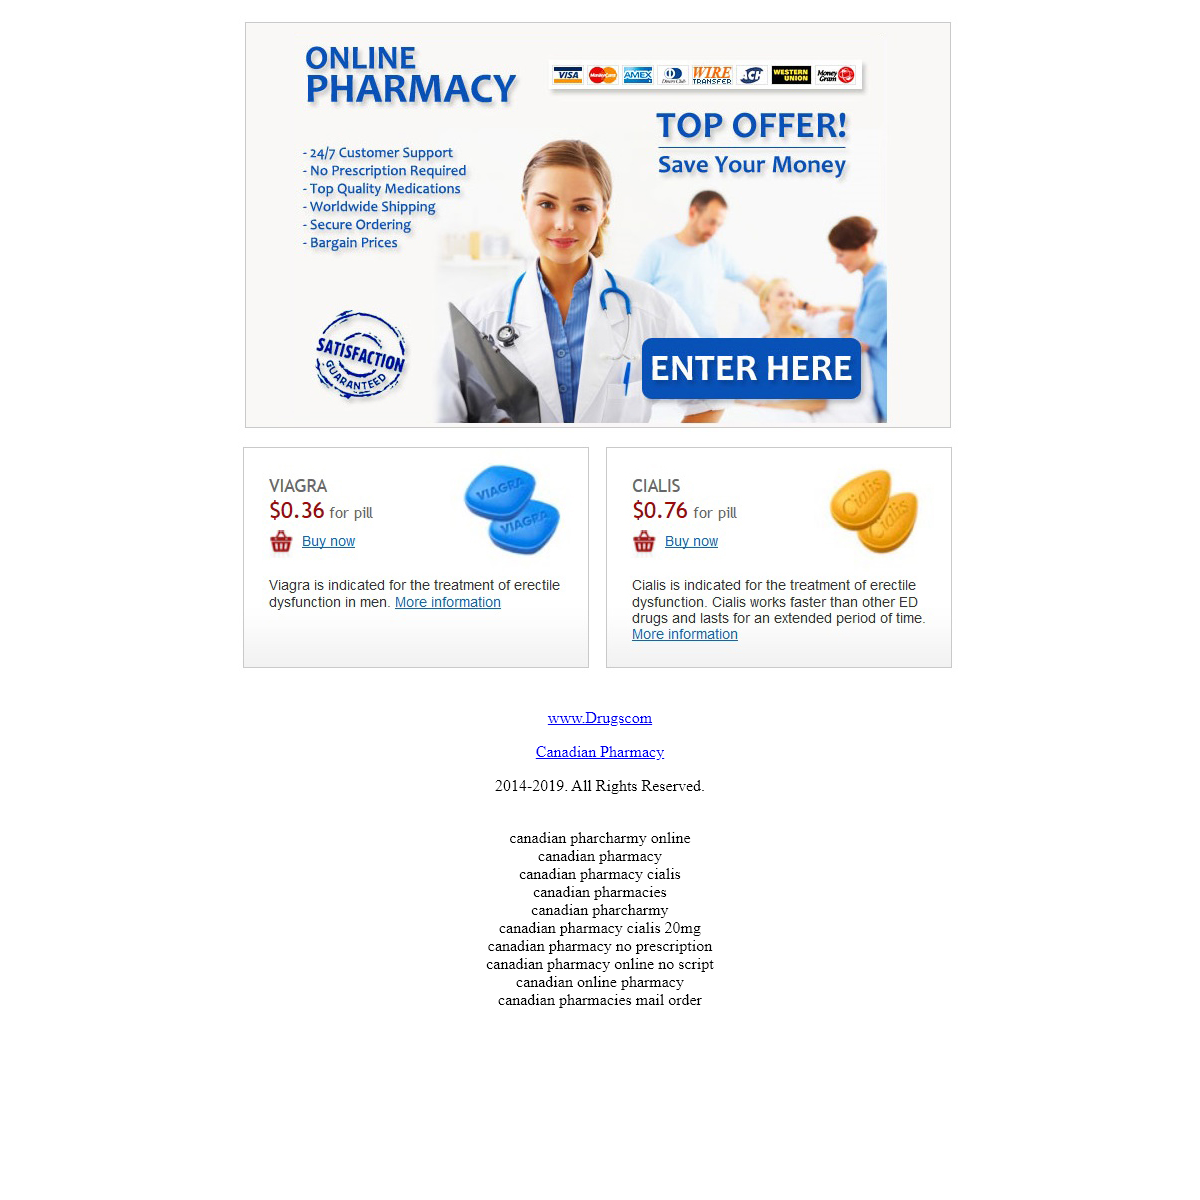 A complete backup of 24hourcanadianpharmacy.com